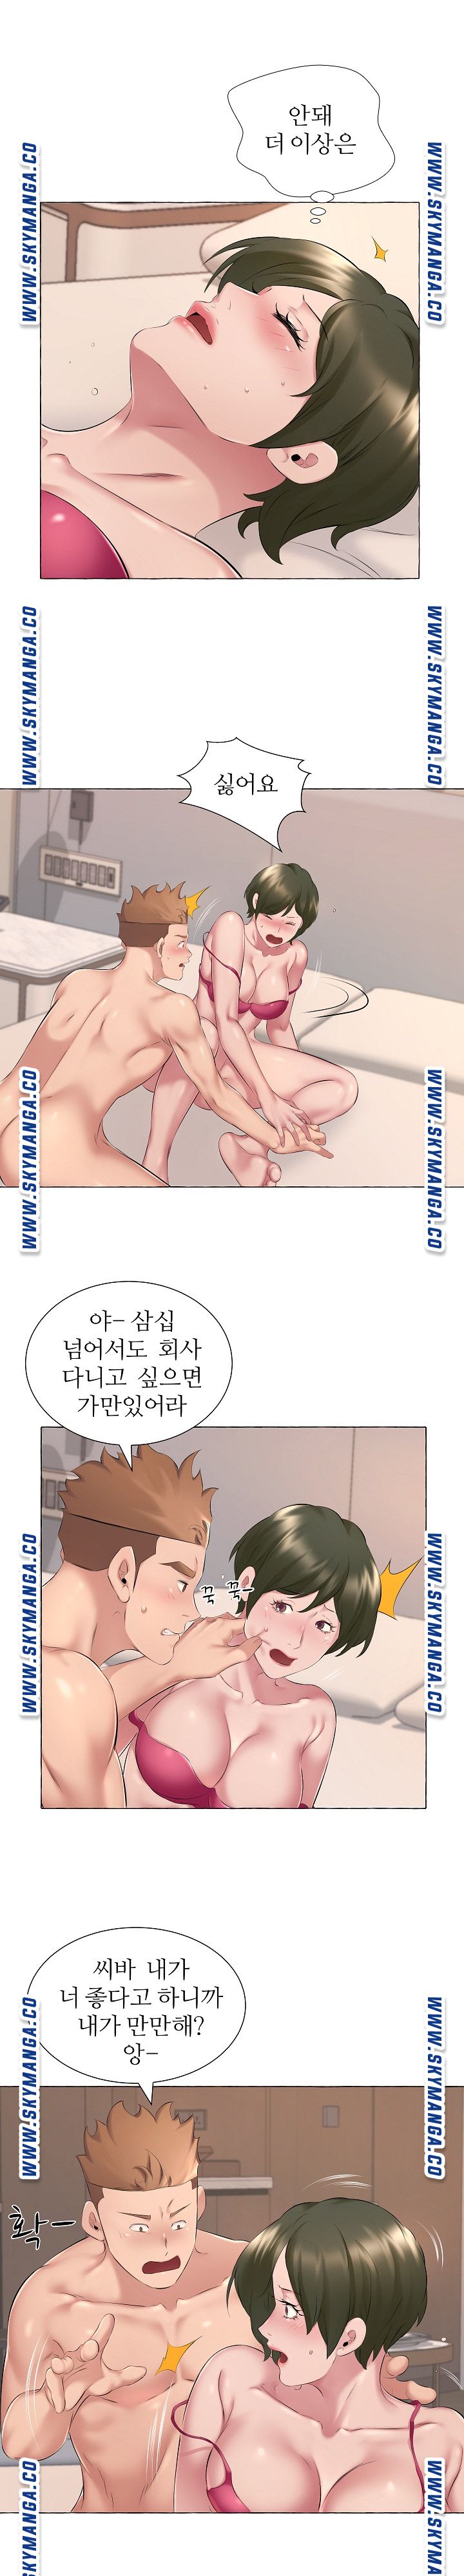 One Room Hotel Raw - Chapter 6 Page 9